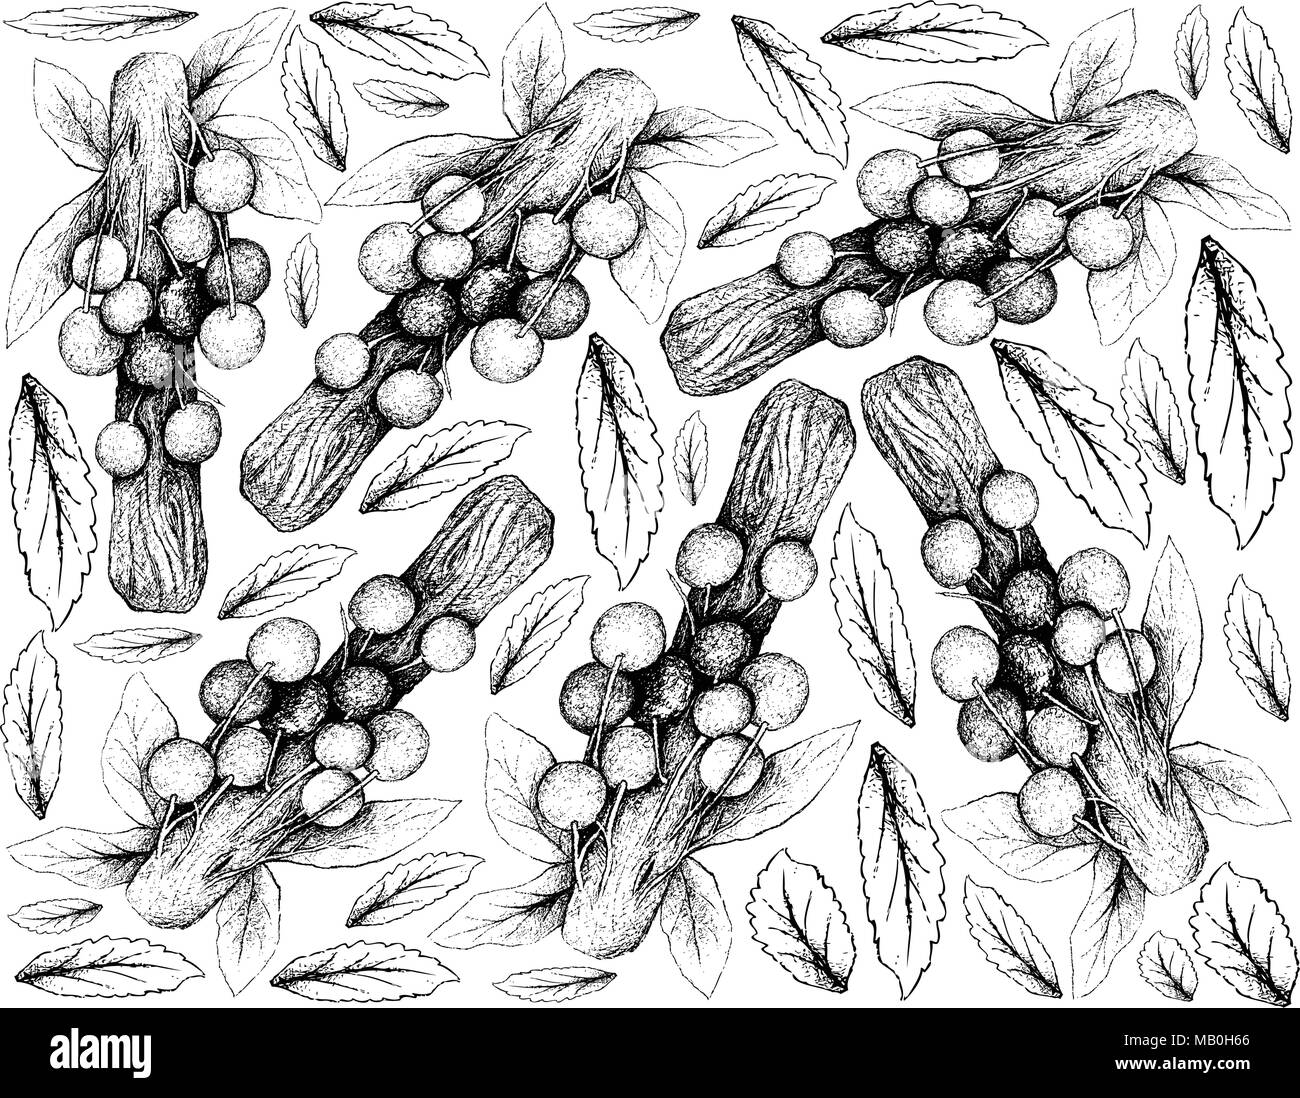 Exotic Fruits, Illustration Wallpaper Background of Hand Drawn Sketch Davidson Plums or Davidsonia Fruits. High in Vitamin C with Essential Nutrient f Stock Vector